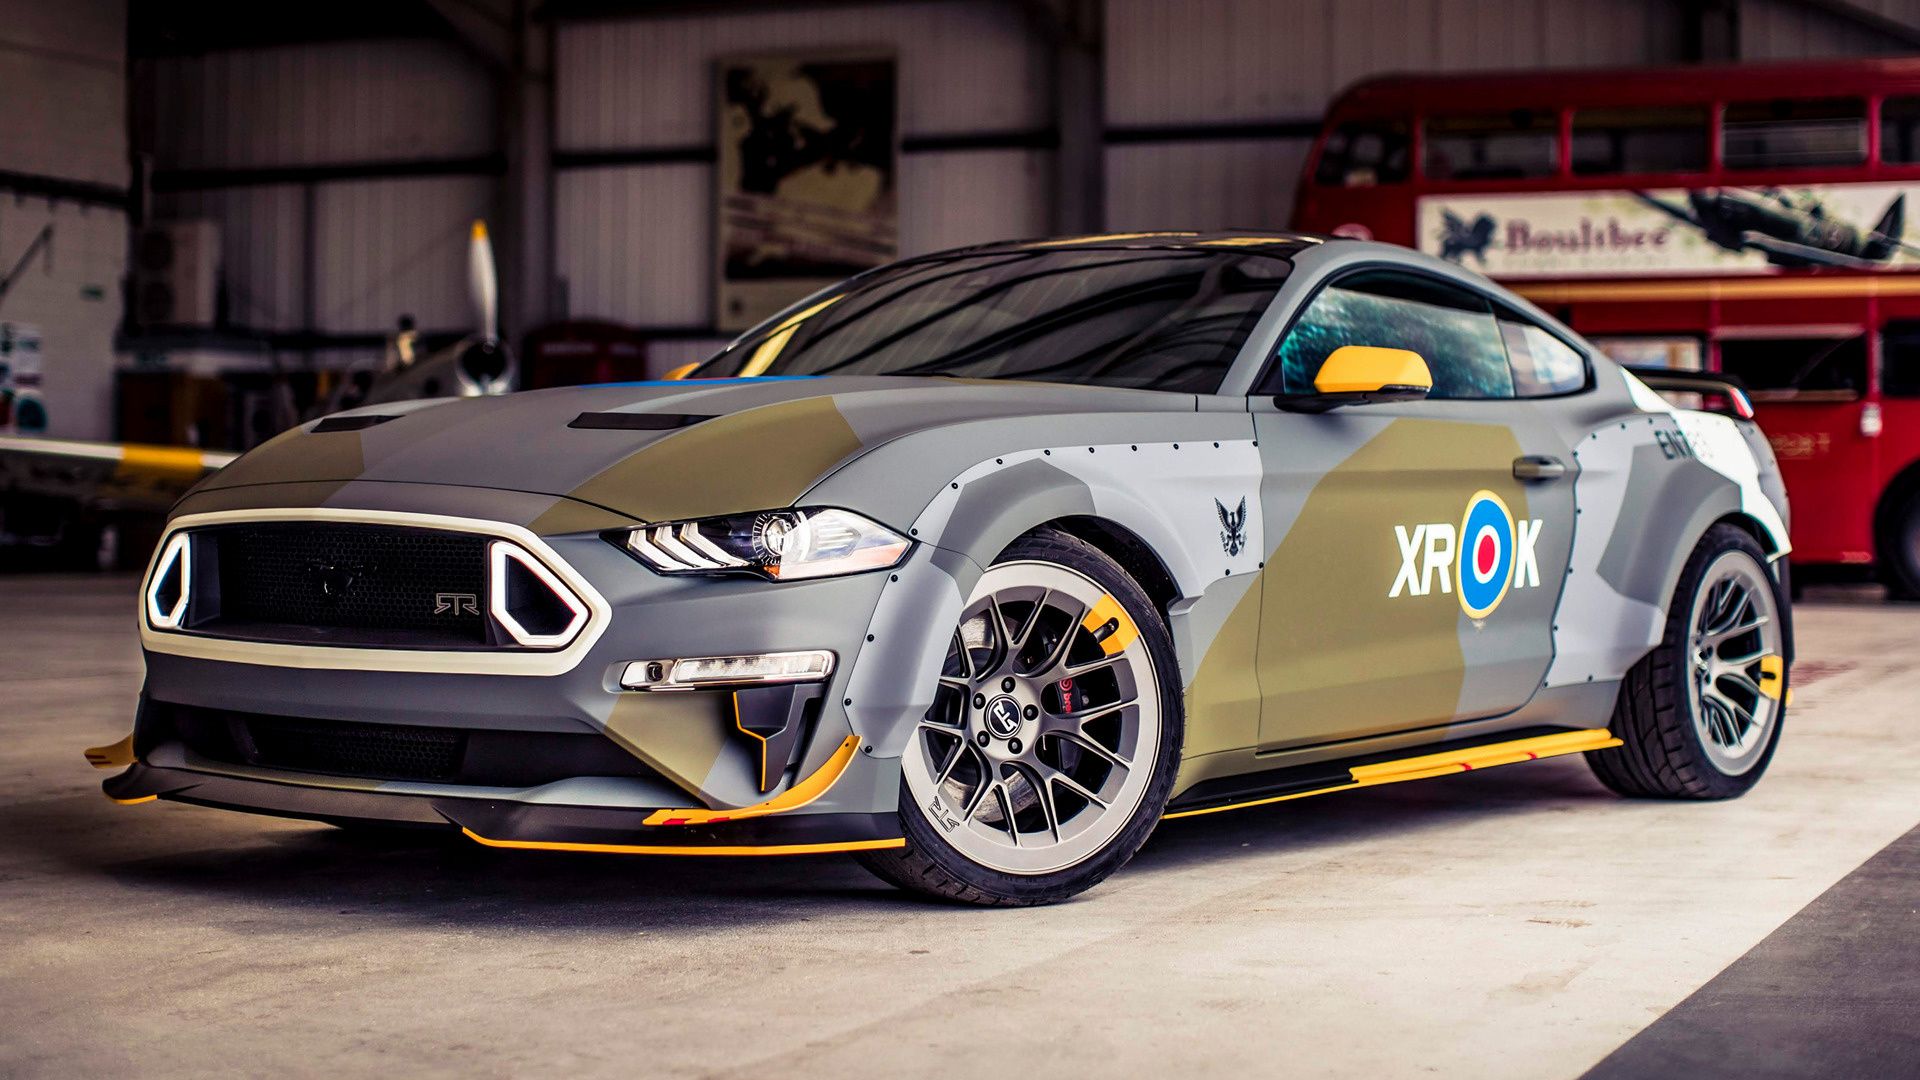 Ford Eagle Squadron Mustang GT and HD Image